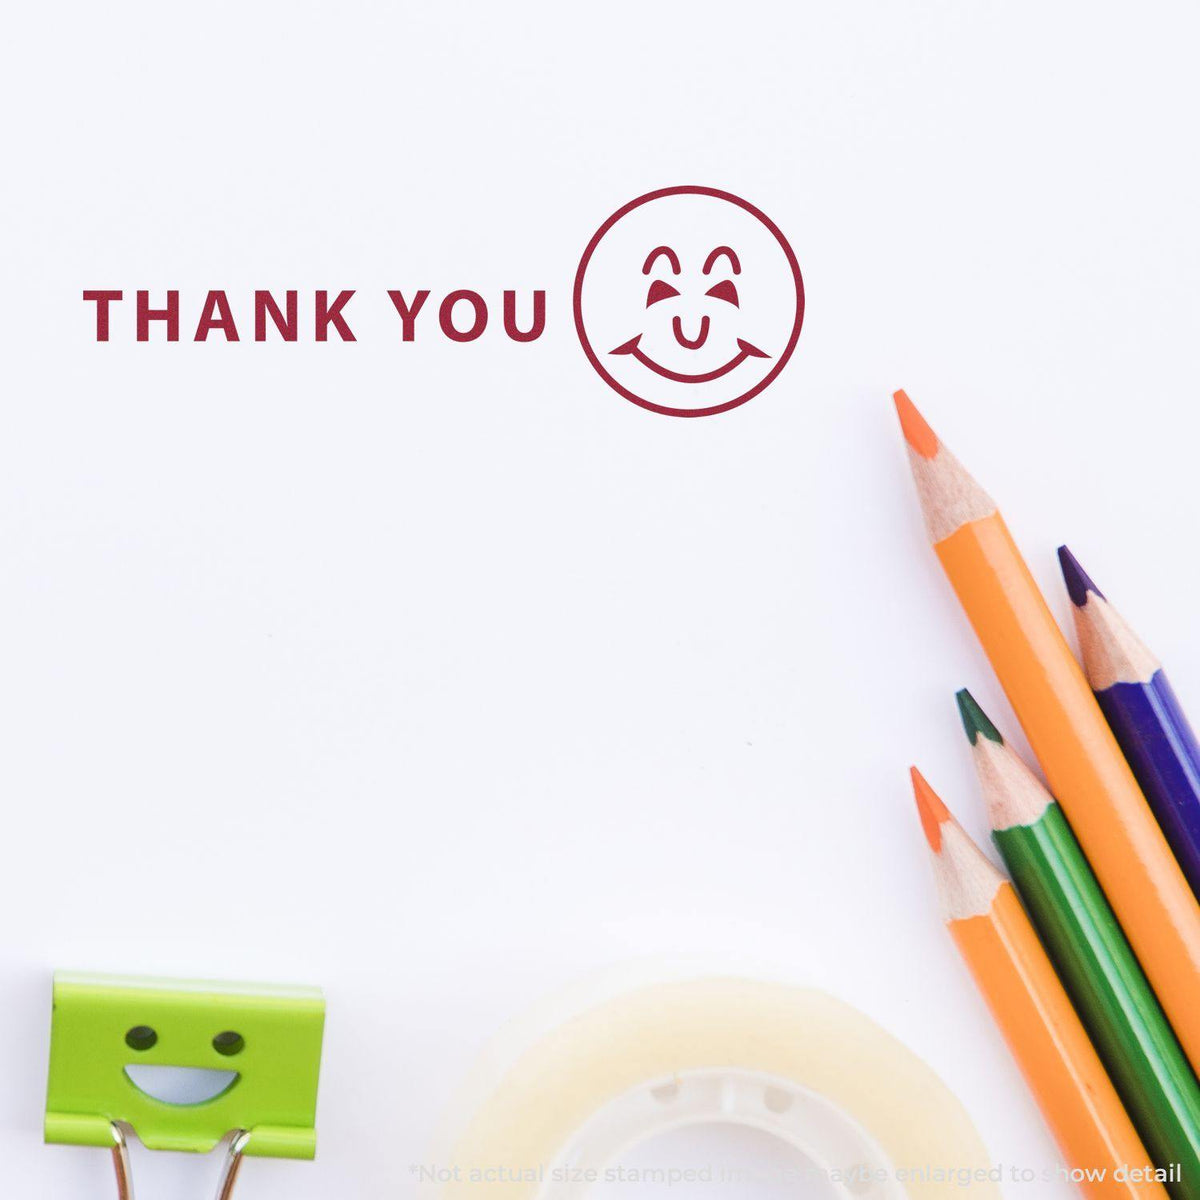 Self-Inking Thank You with Smiley Stamp - Engineer Seal Stamps - Brand_Trodat, Impression Size_Small, Stamp Type_Self-Inking Stamp, Type of Use_General, Type of Use_Teacher